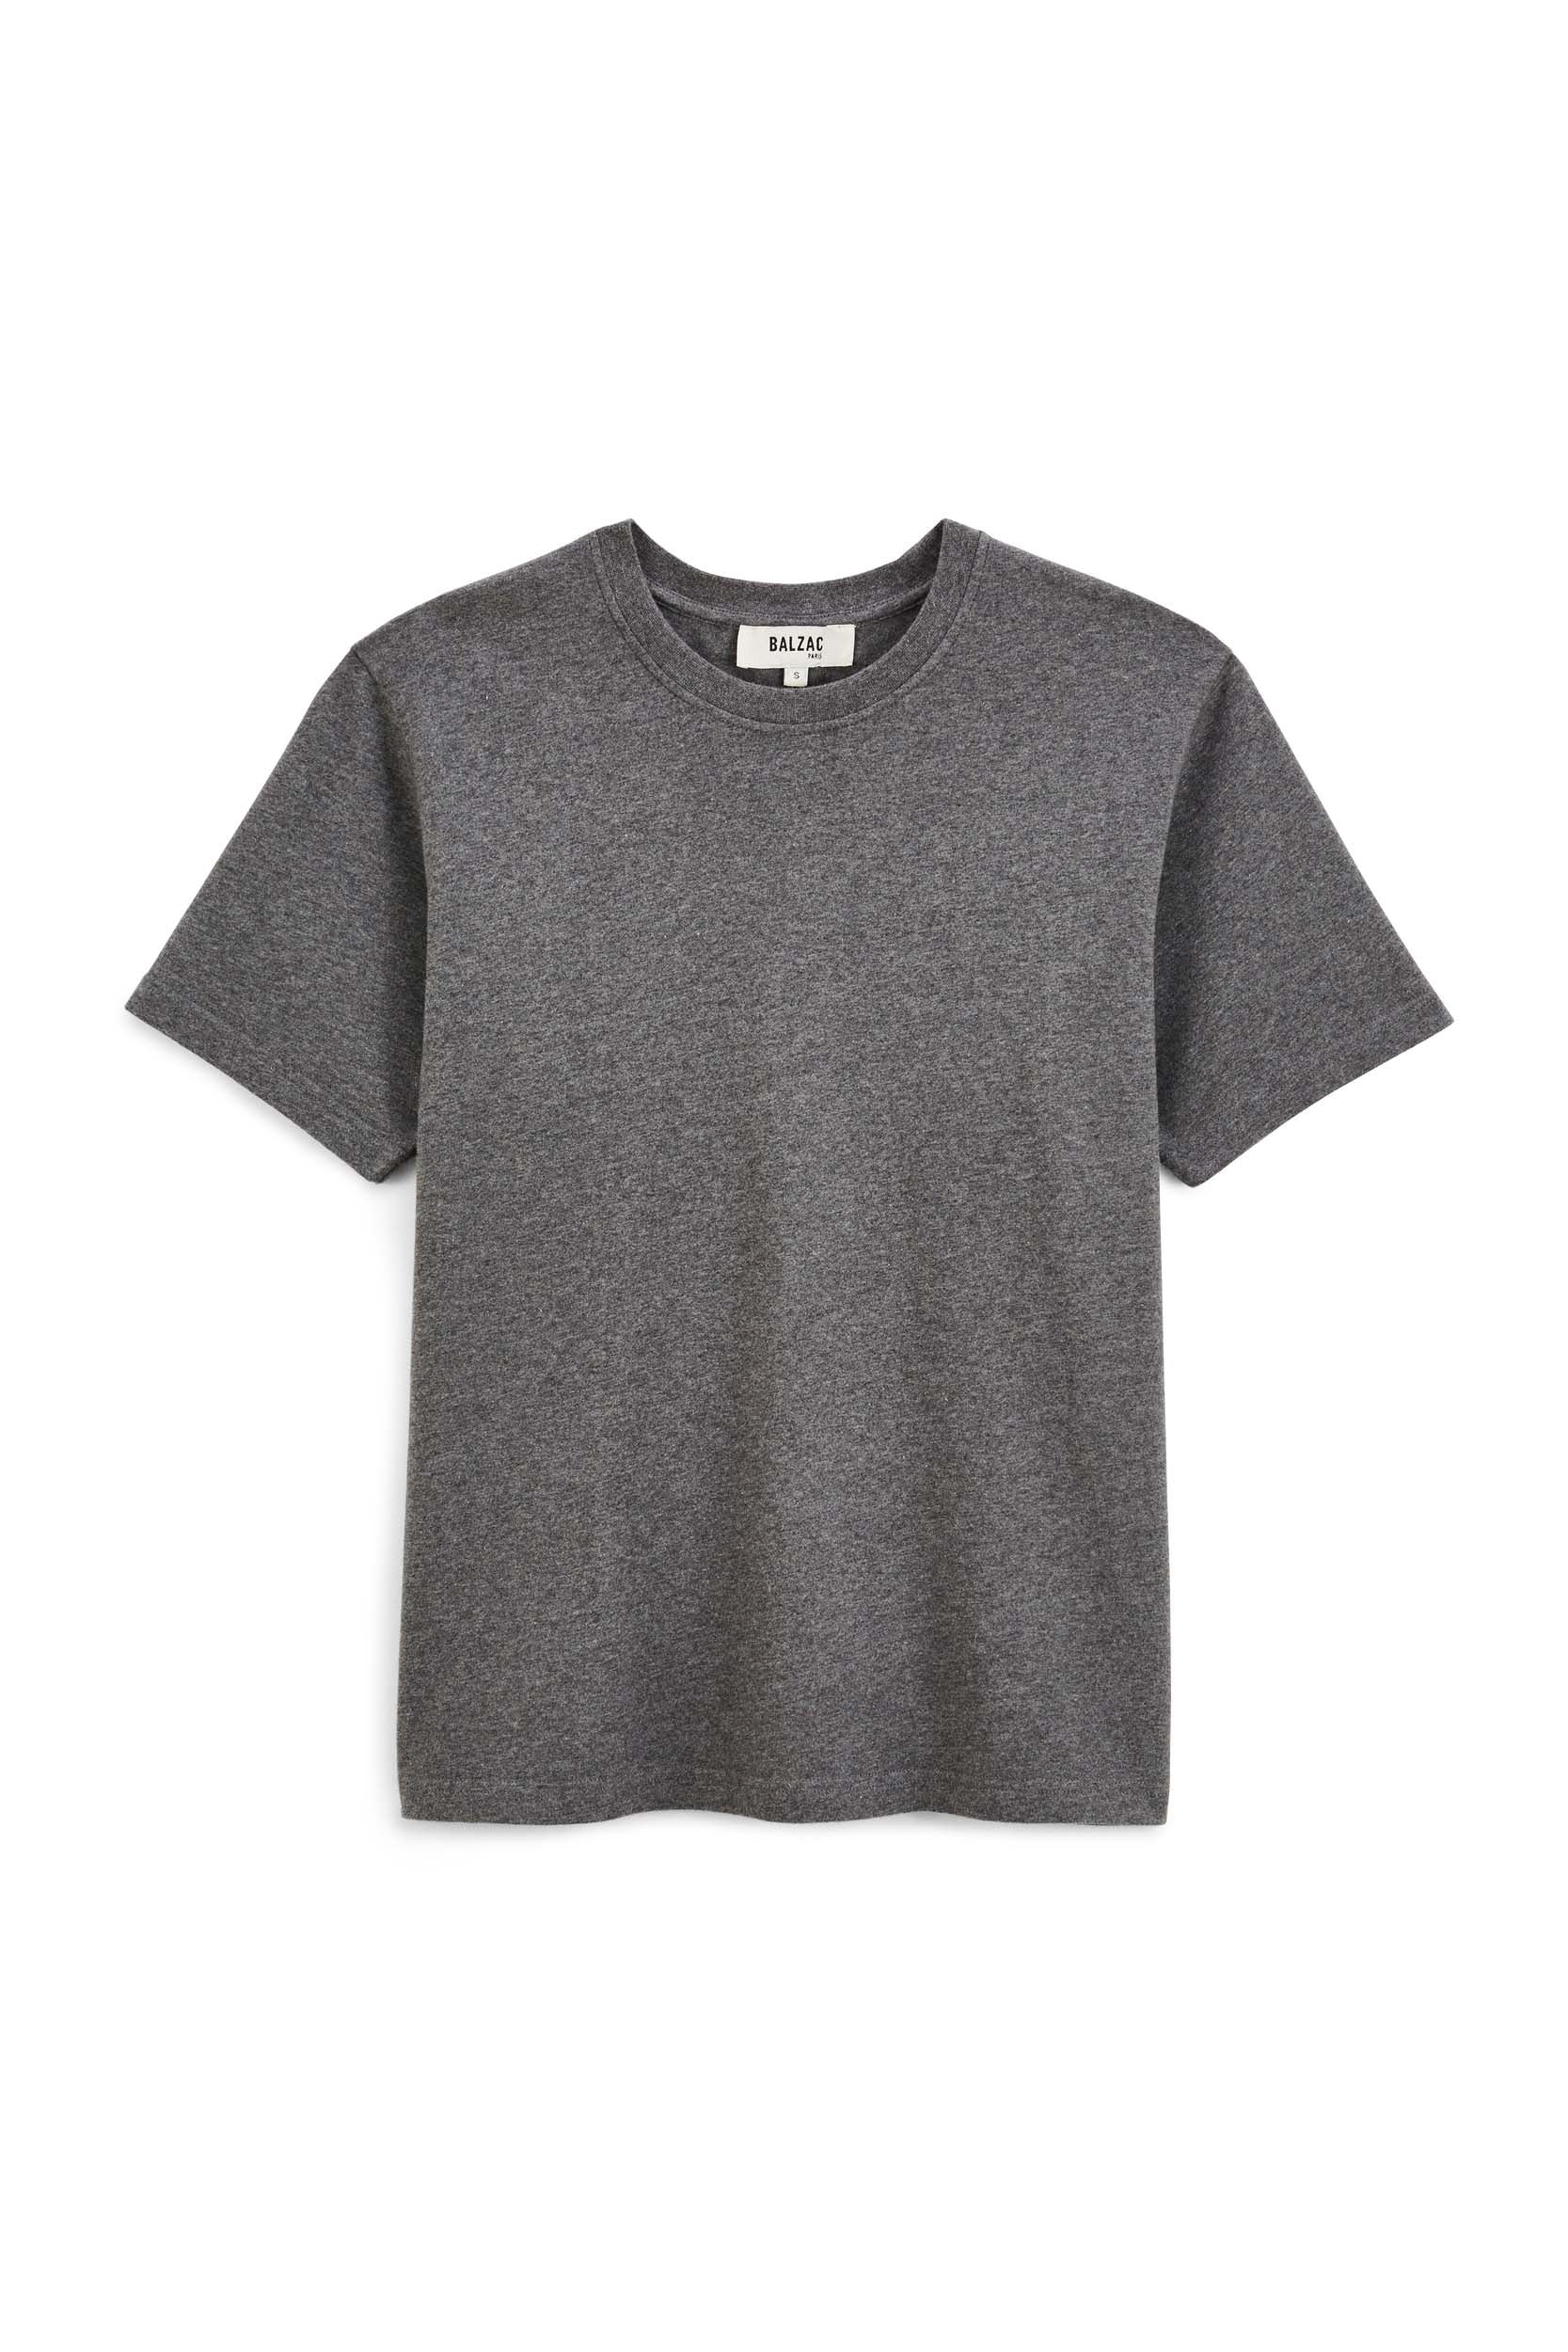 Tee-shirt Bree gris anthracite